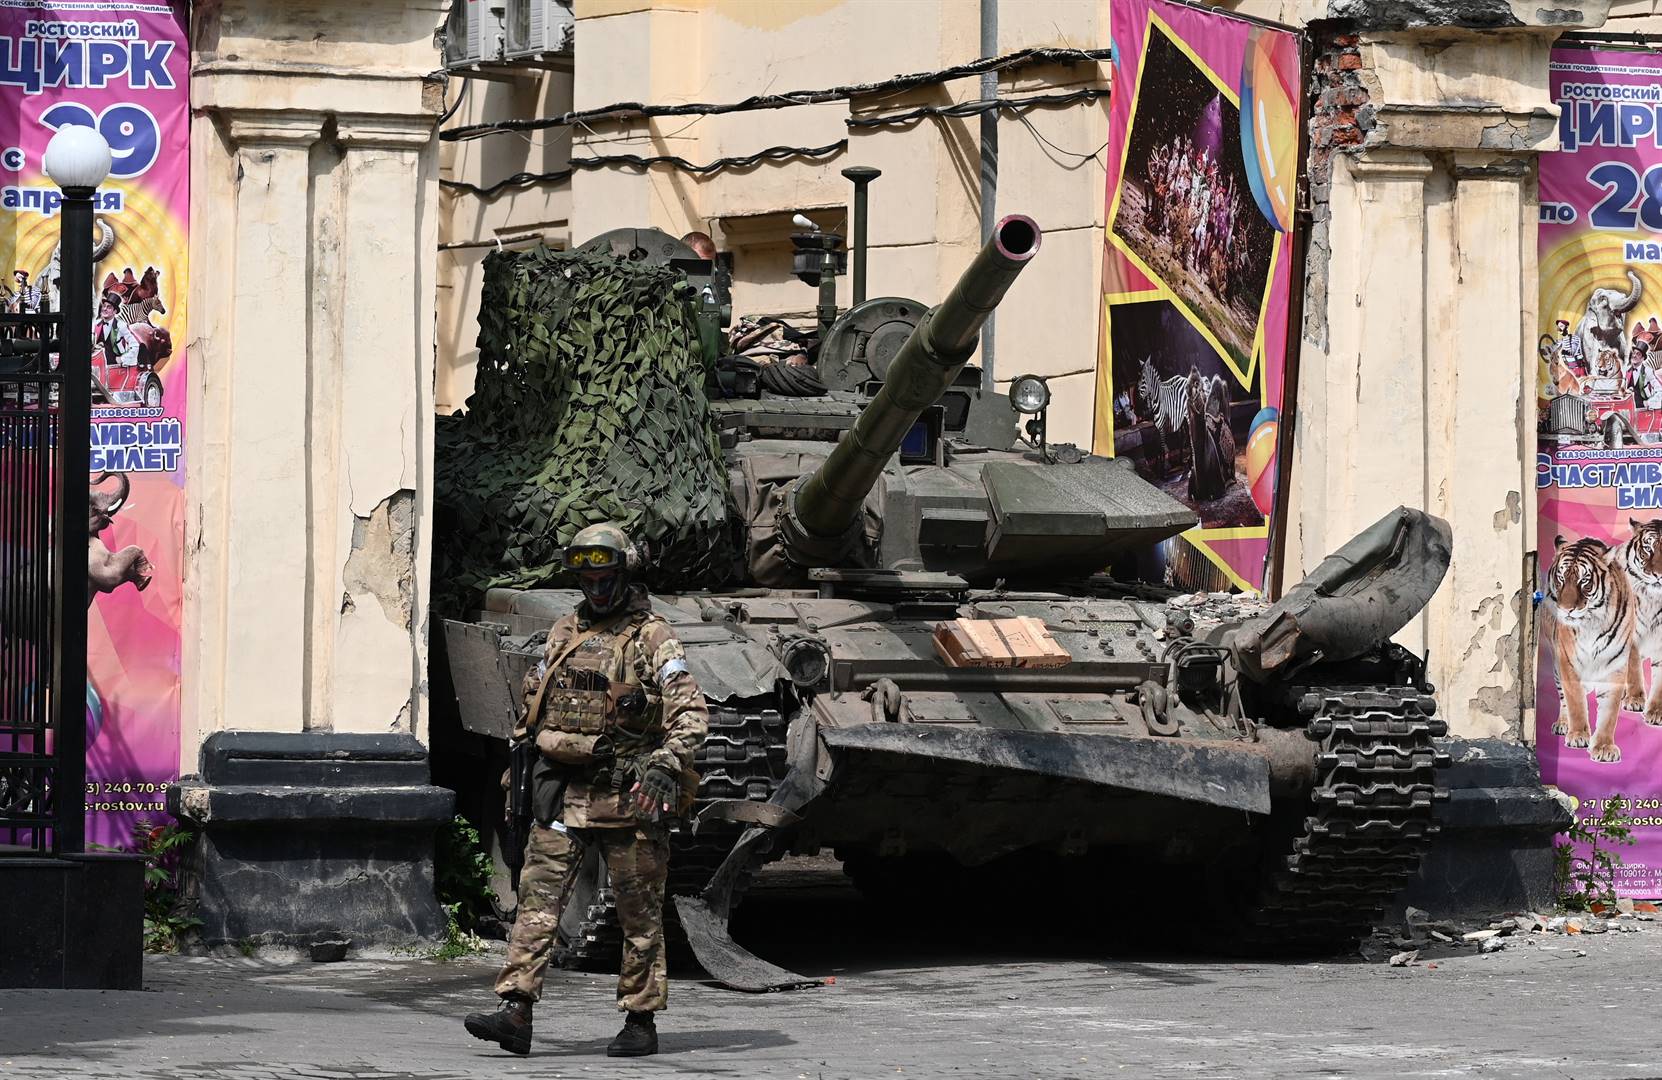 Fighter of the Wagner private mercenary group walks past a tank near a local circus in the city of Rostov-on-Don in Russia, yesterday